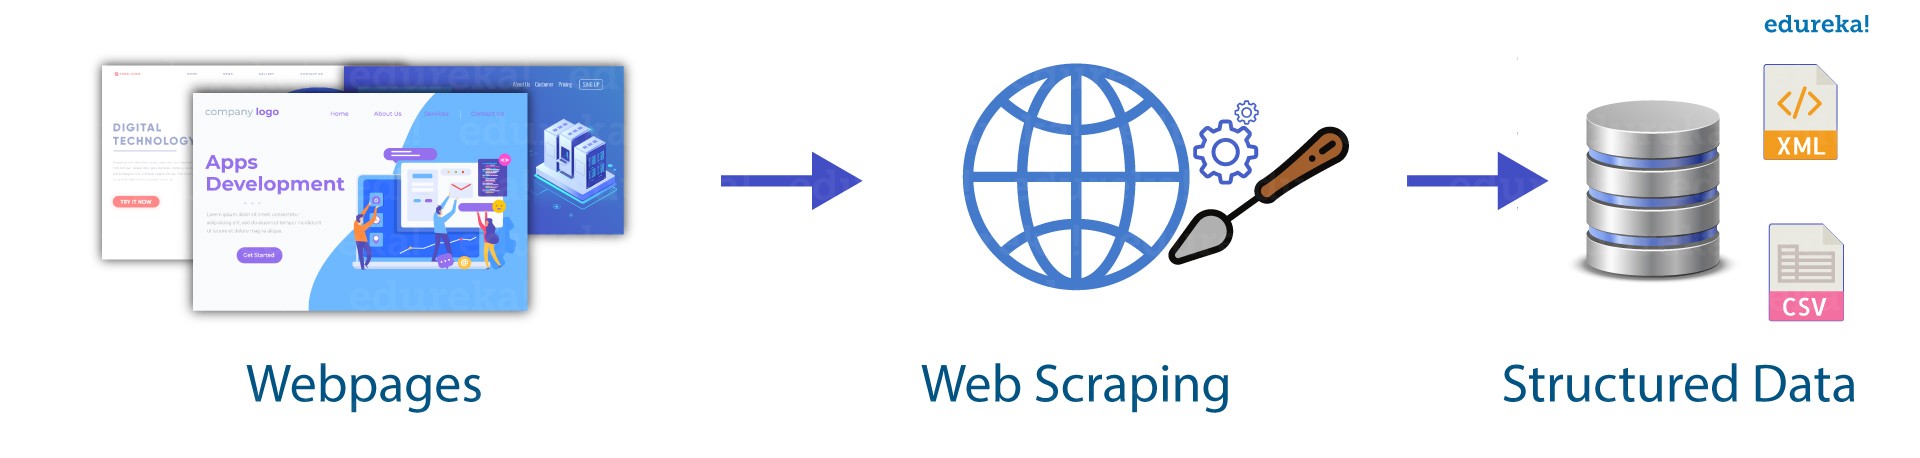 Web scraping robot with python